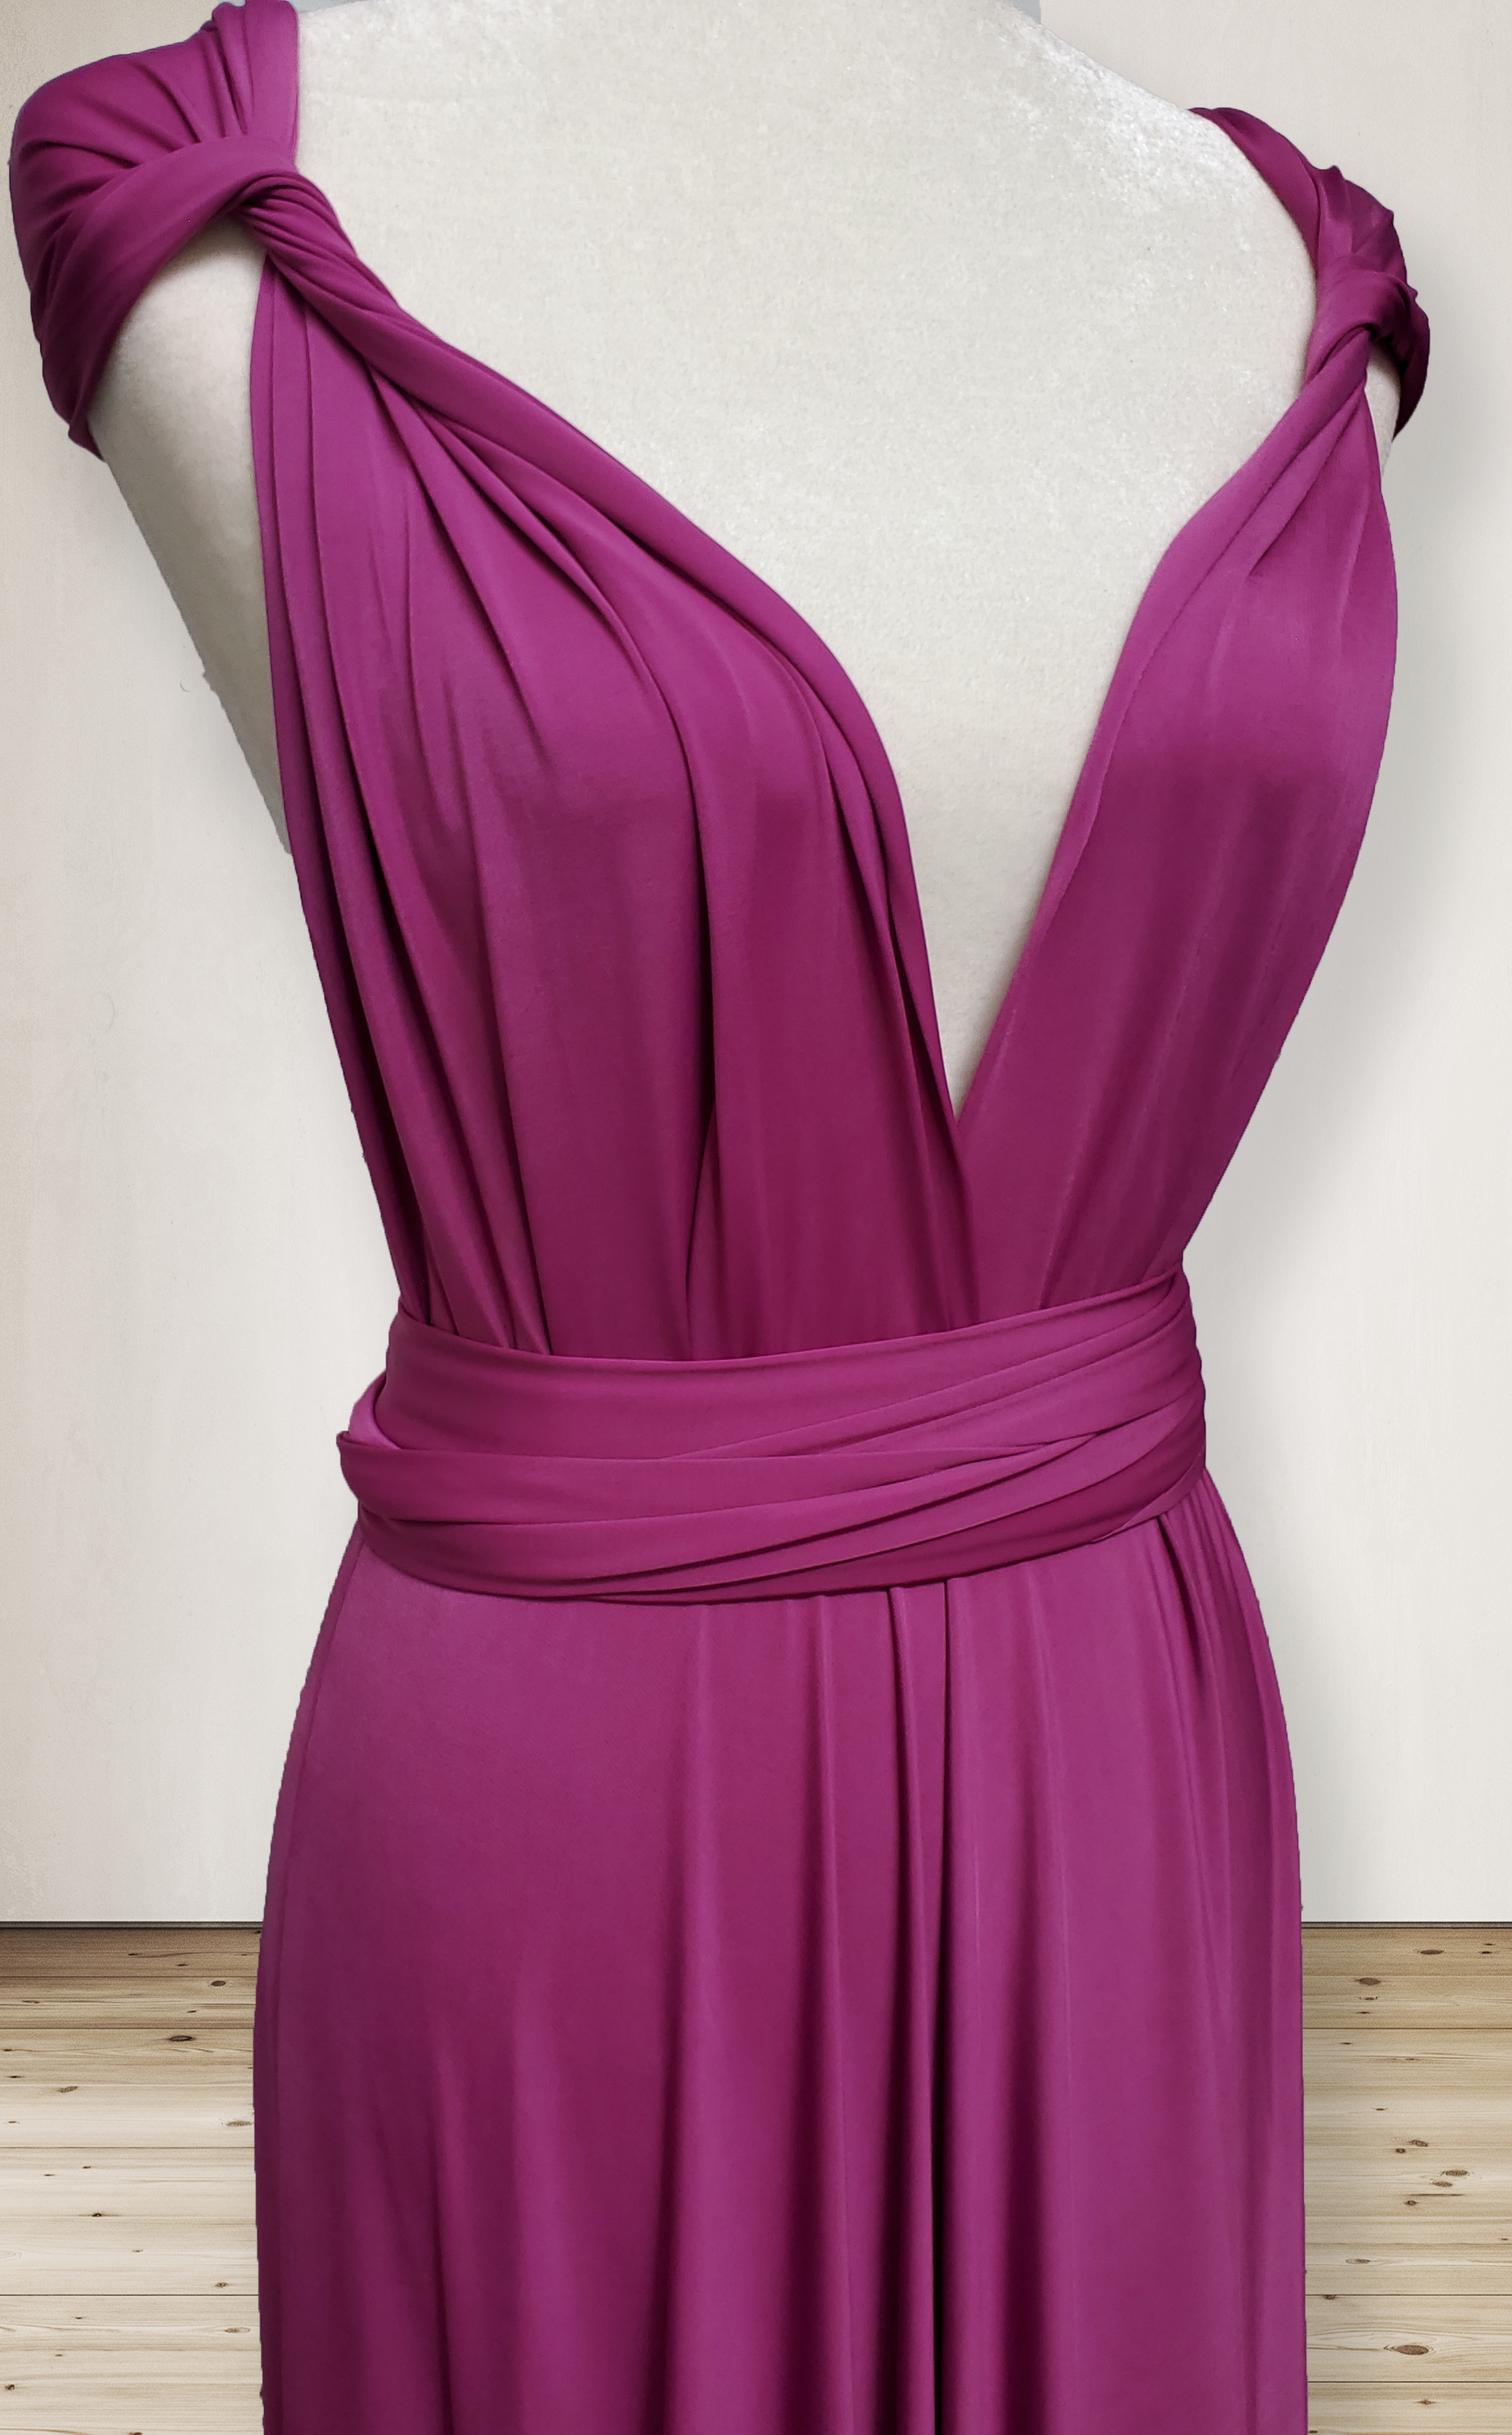 Magenta Infinity Dress Bridesmaid Multiway Convertible Dress Made in USA +36 Colors